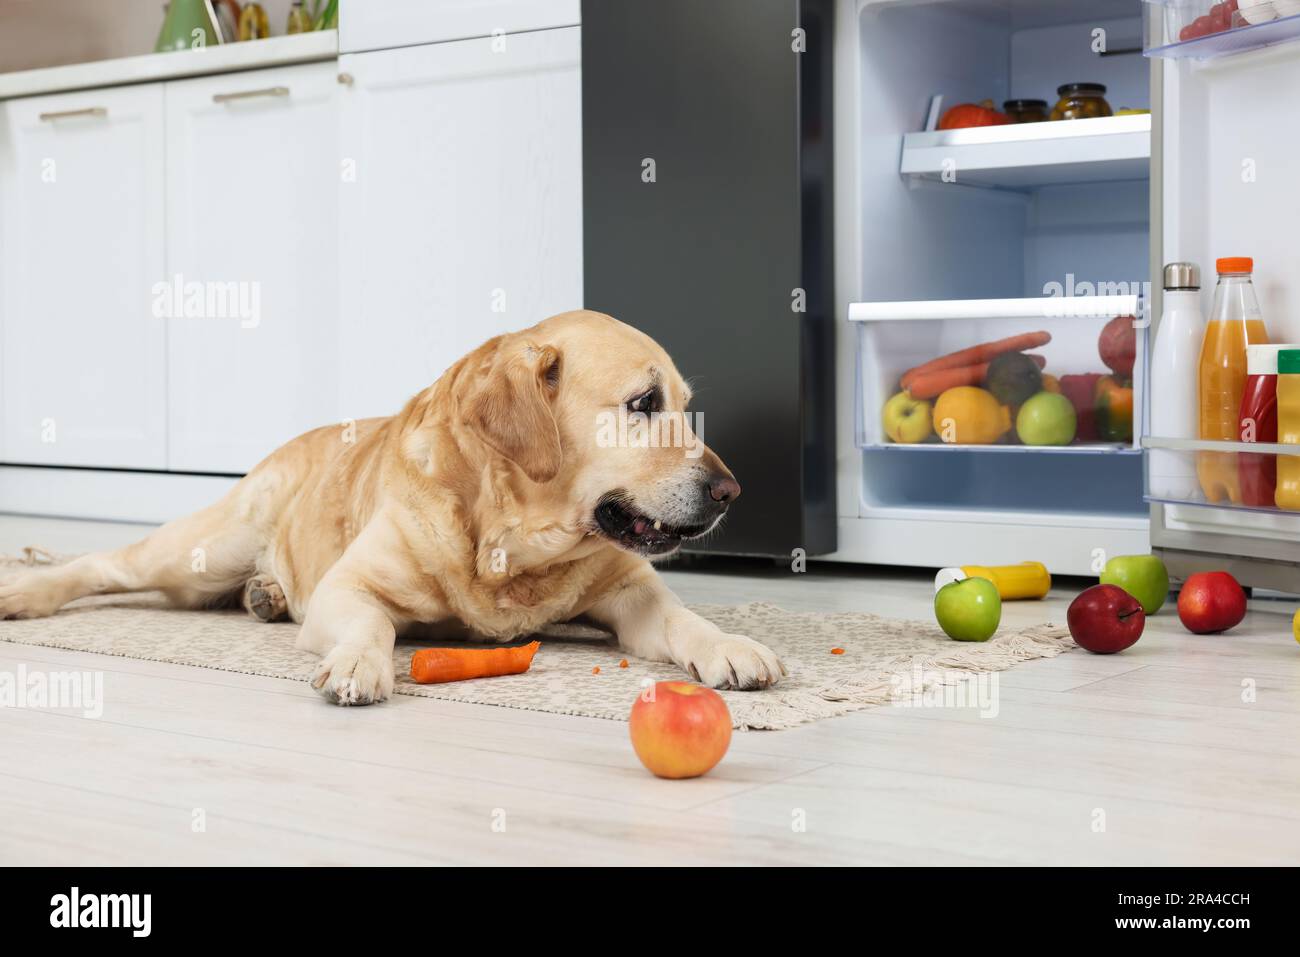 Cute Labrador Retriever with scattered fruits near refrigerator in kitchen Stock Photo